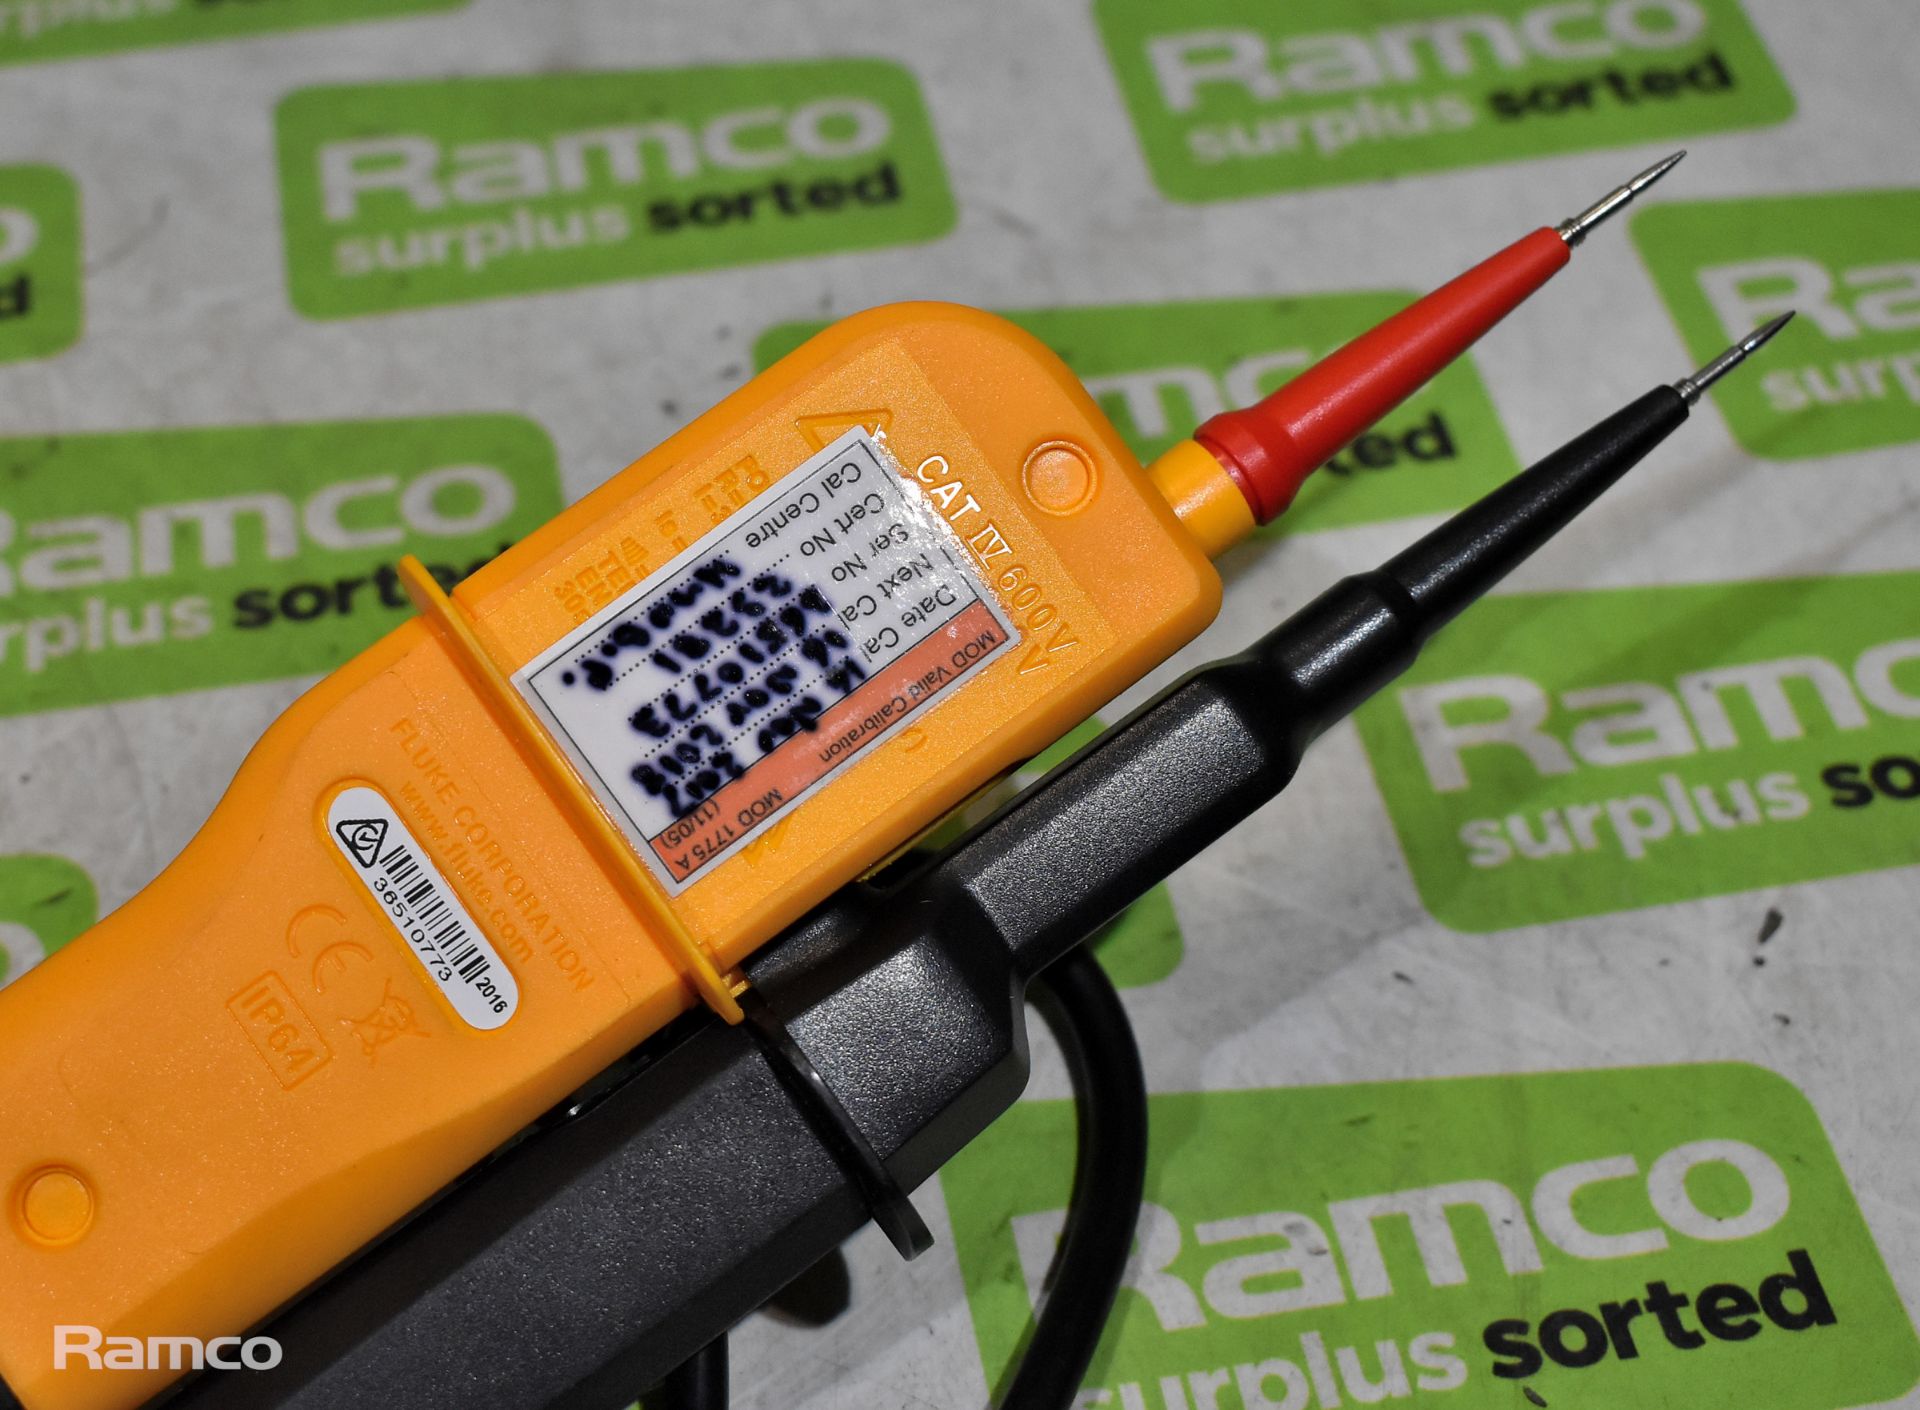 2x Fluke T110 voltage and continuity testers - Image 6 of 6